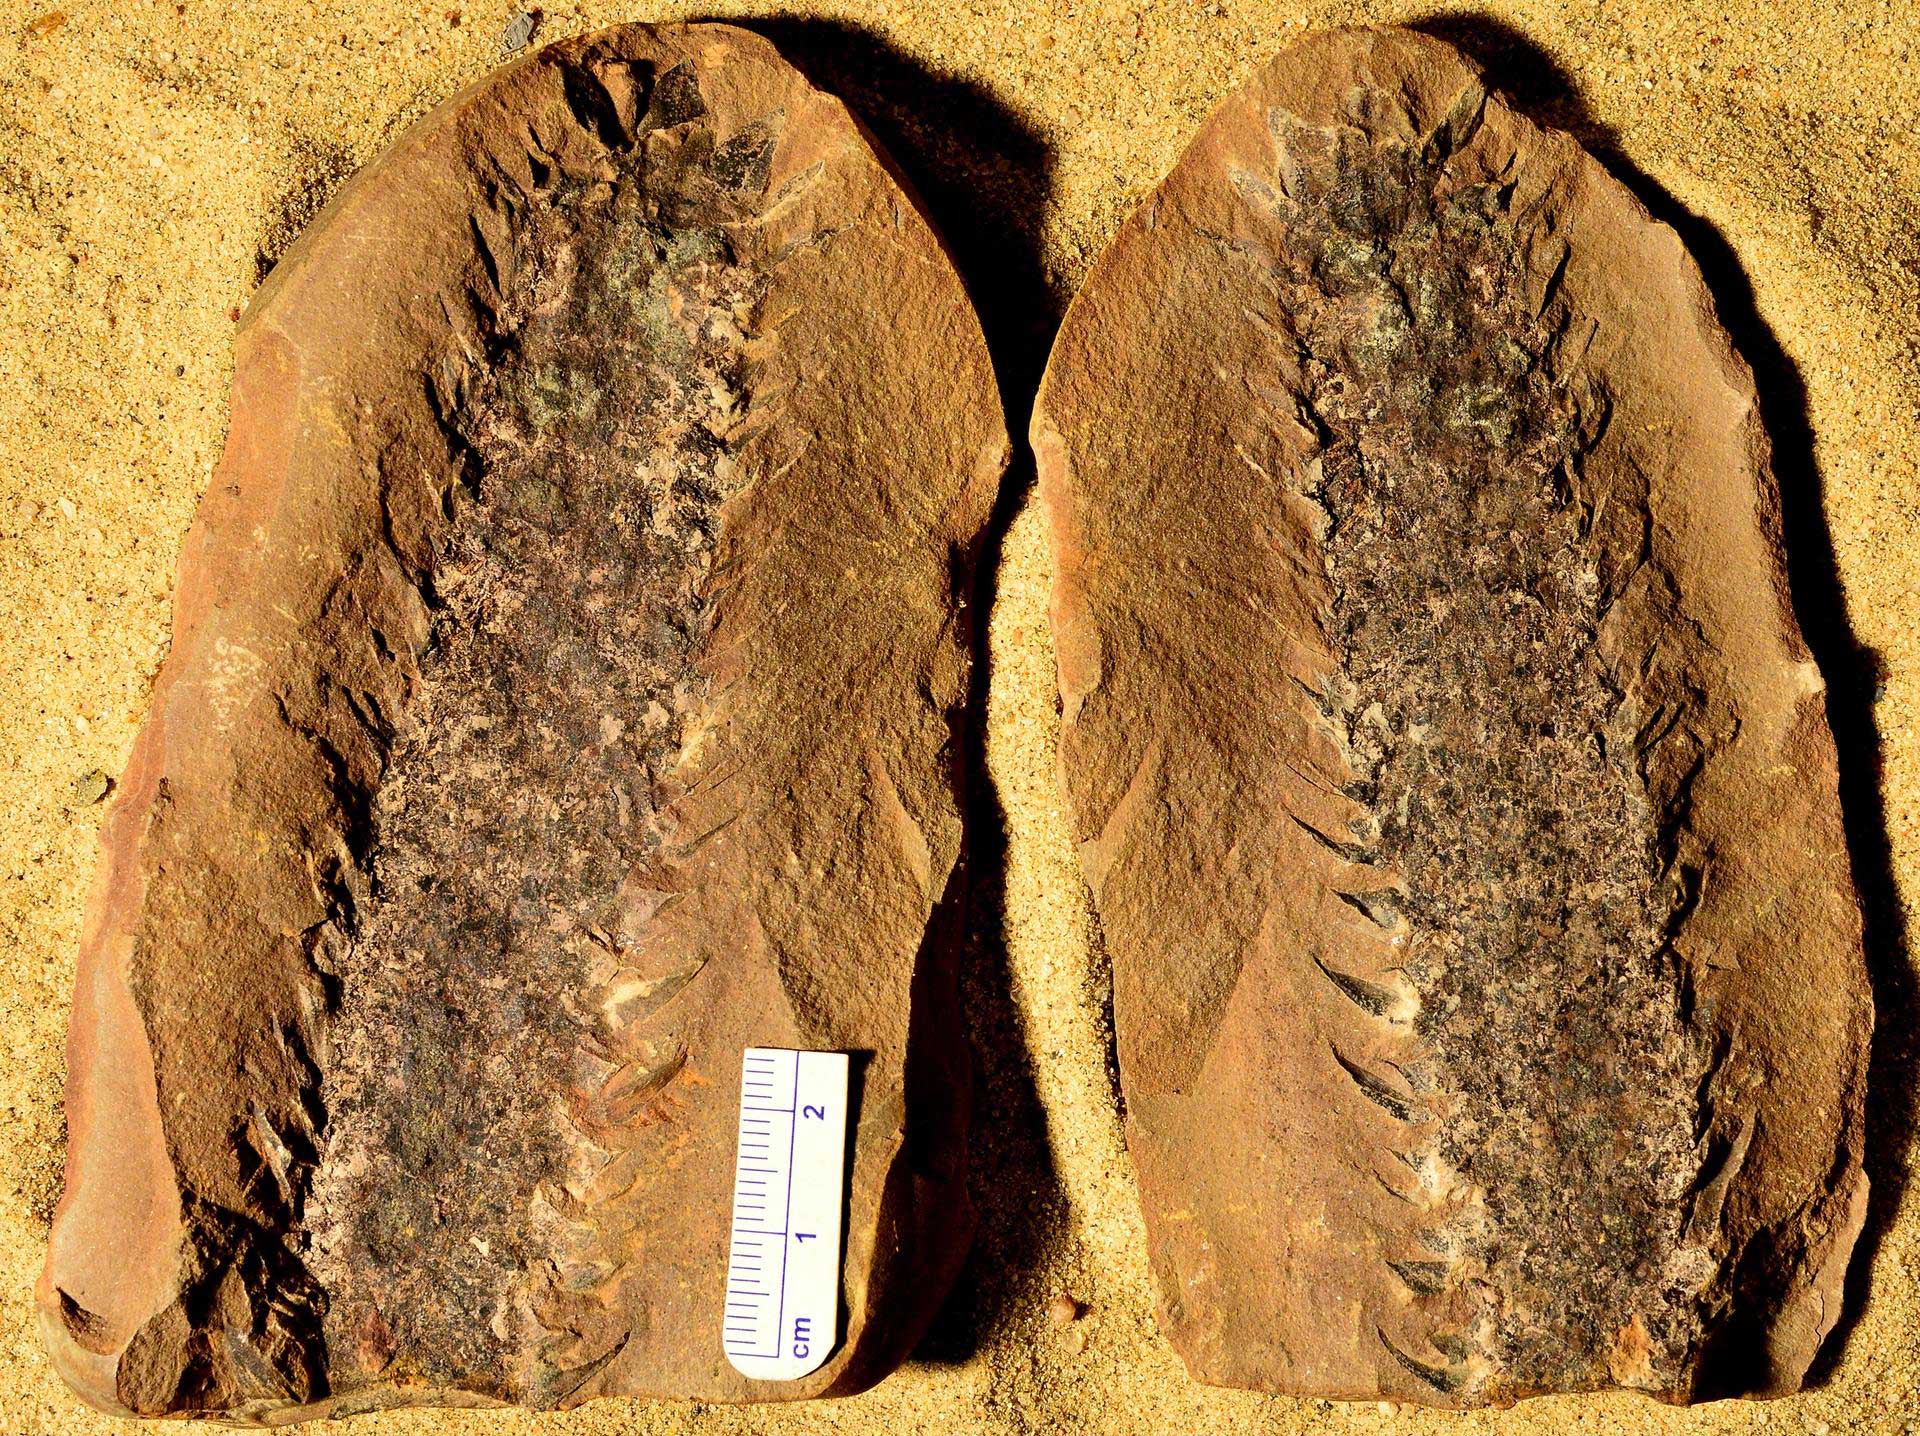 Photograph of a Mazon Creek nodule split in half to reveal the impression of a large lycophyte cone on two surfaces (both part and counterpart shown). The cone is an elongated structure with a rounded tip. The base of the cone is missing. Cone scales can be seen on the sides of the cone; the scales look like short spines. 